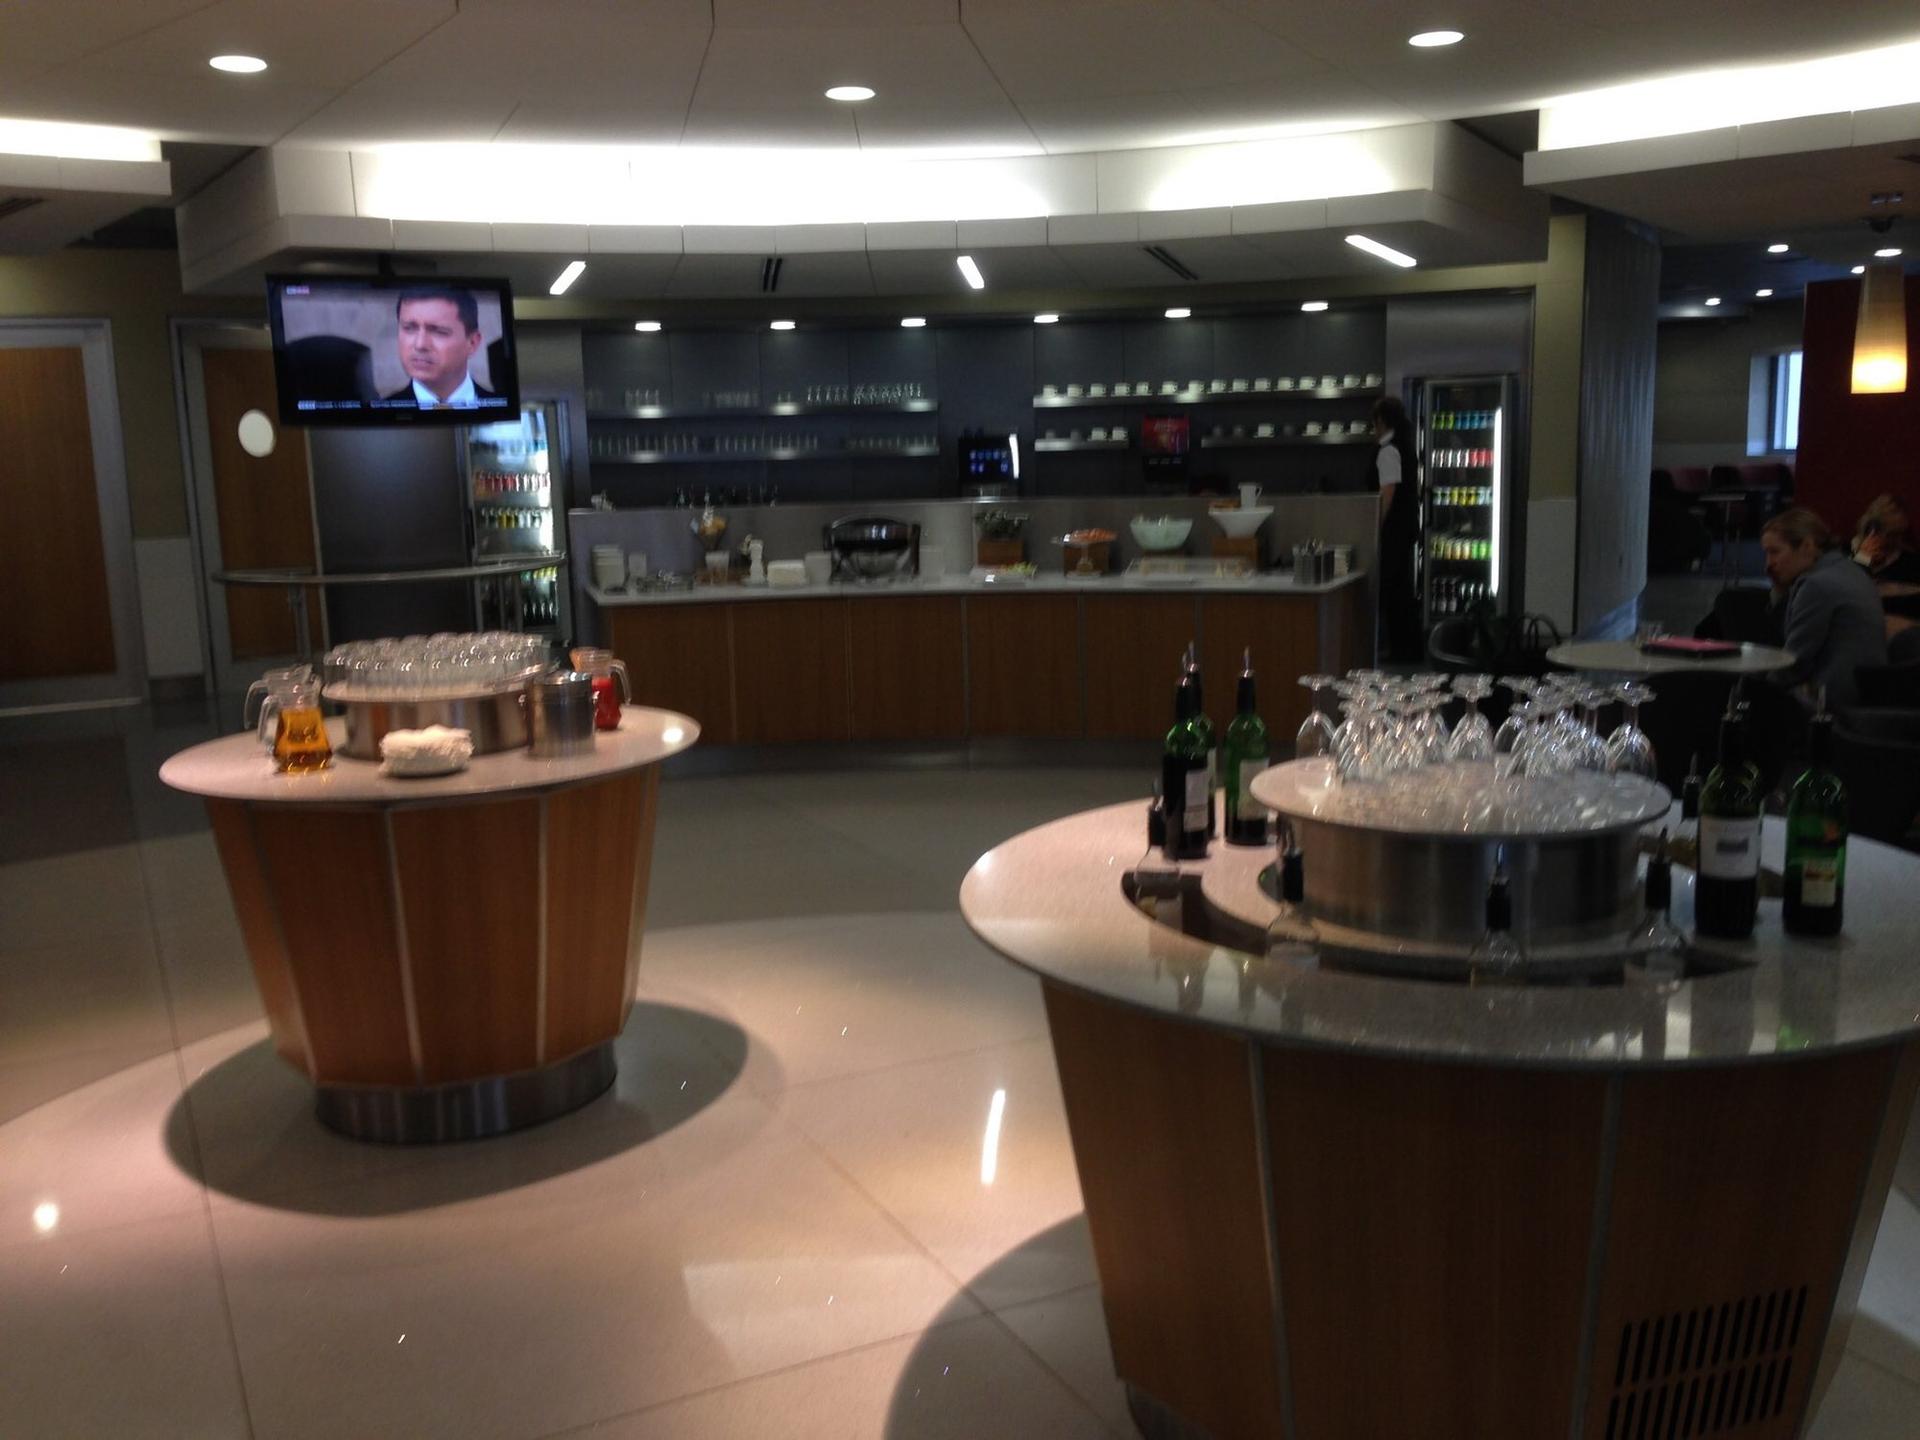 American Airlines Admirals Club image 11 of 38